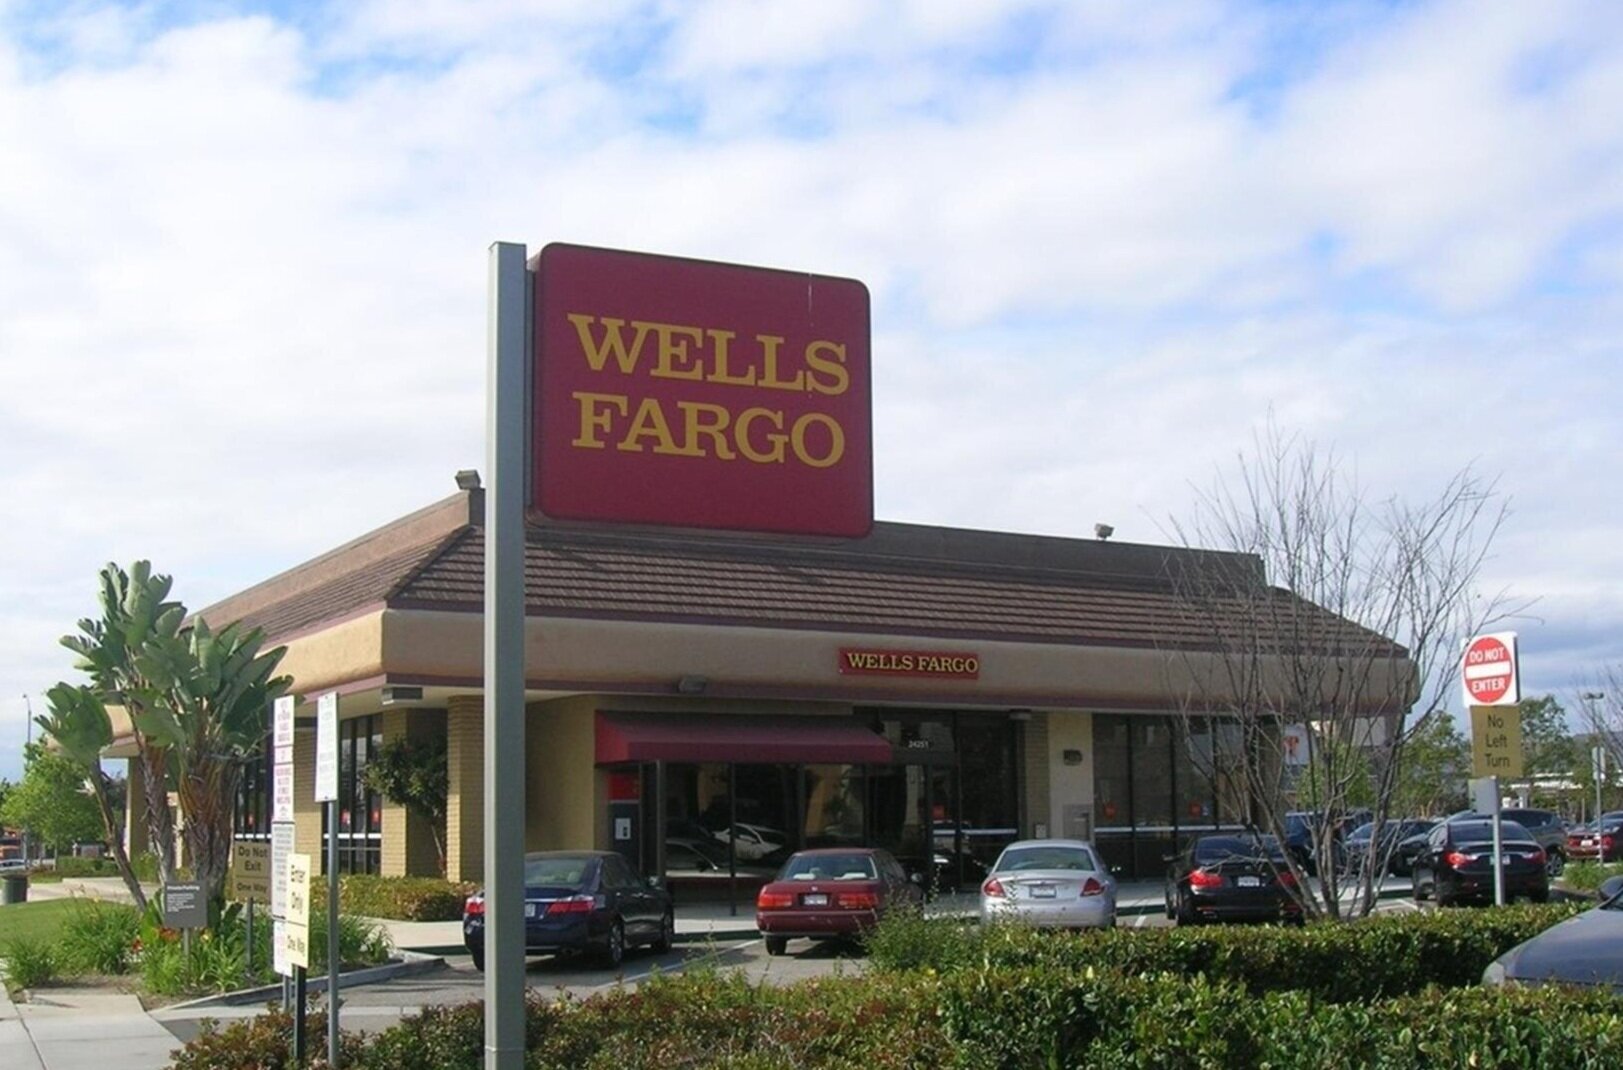  Well Fargo: Lake Forest, CA 